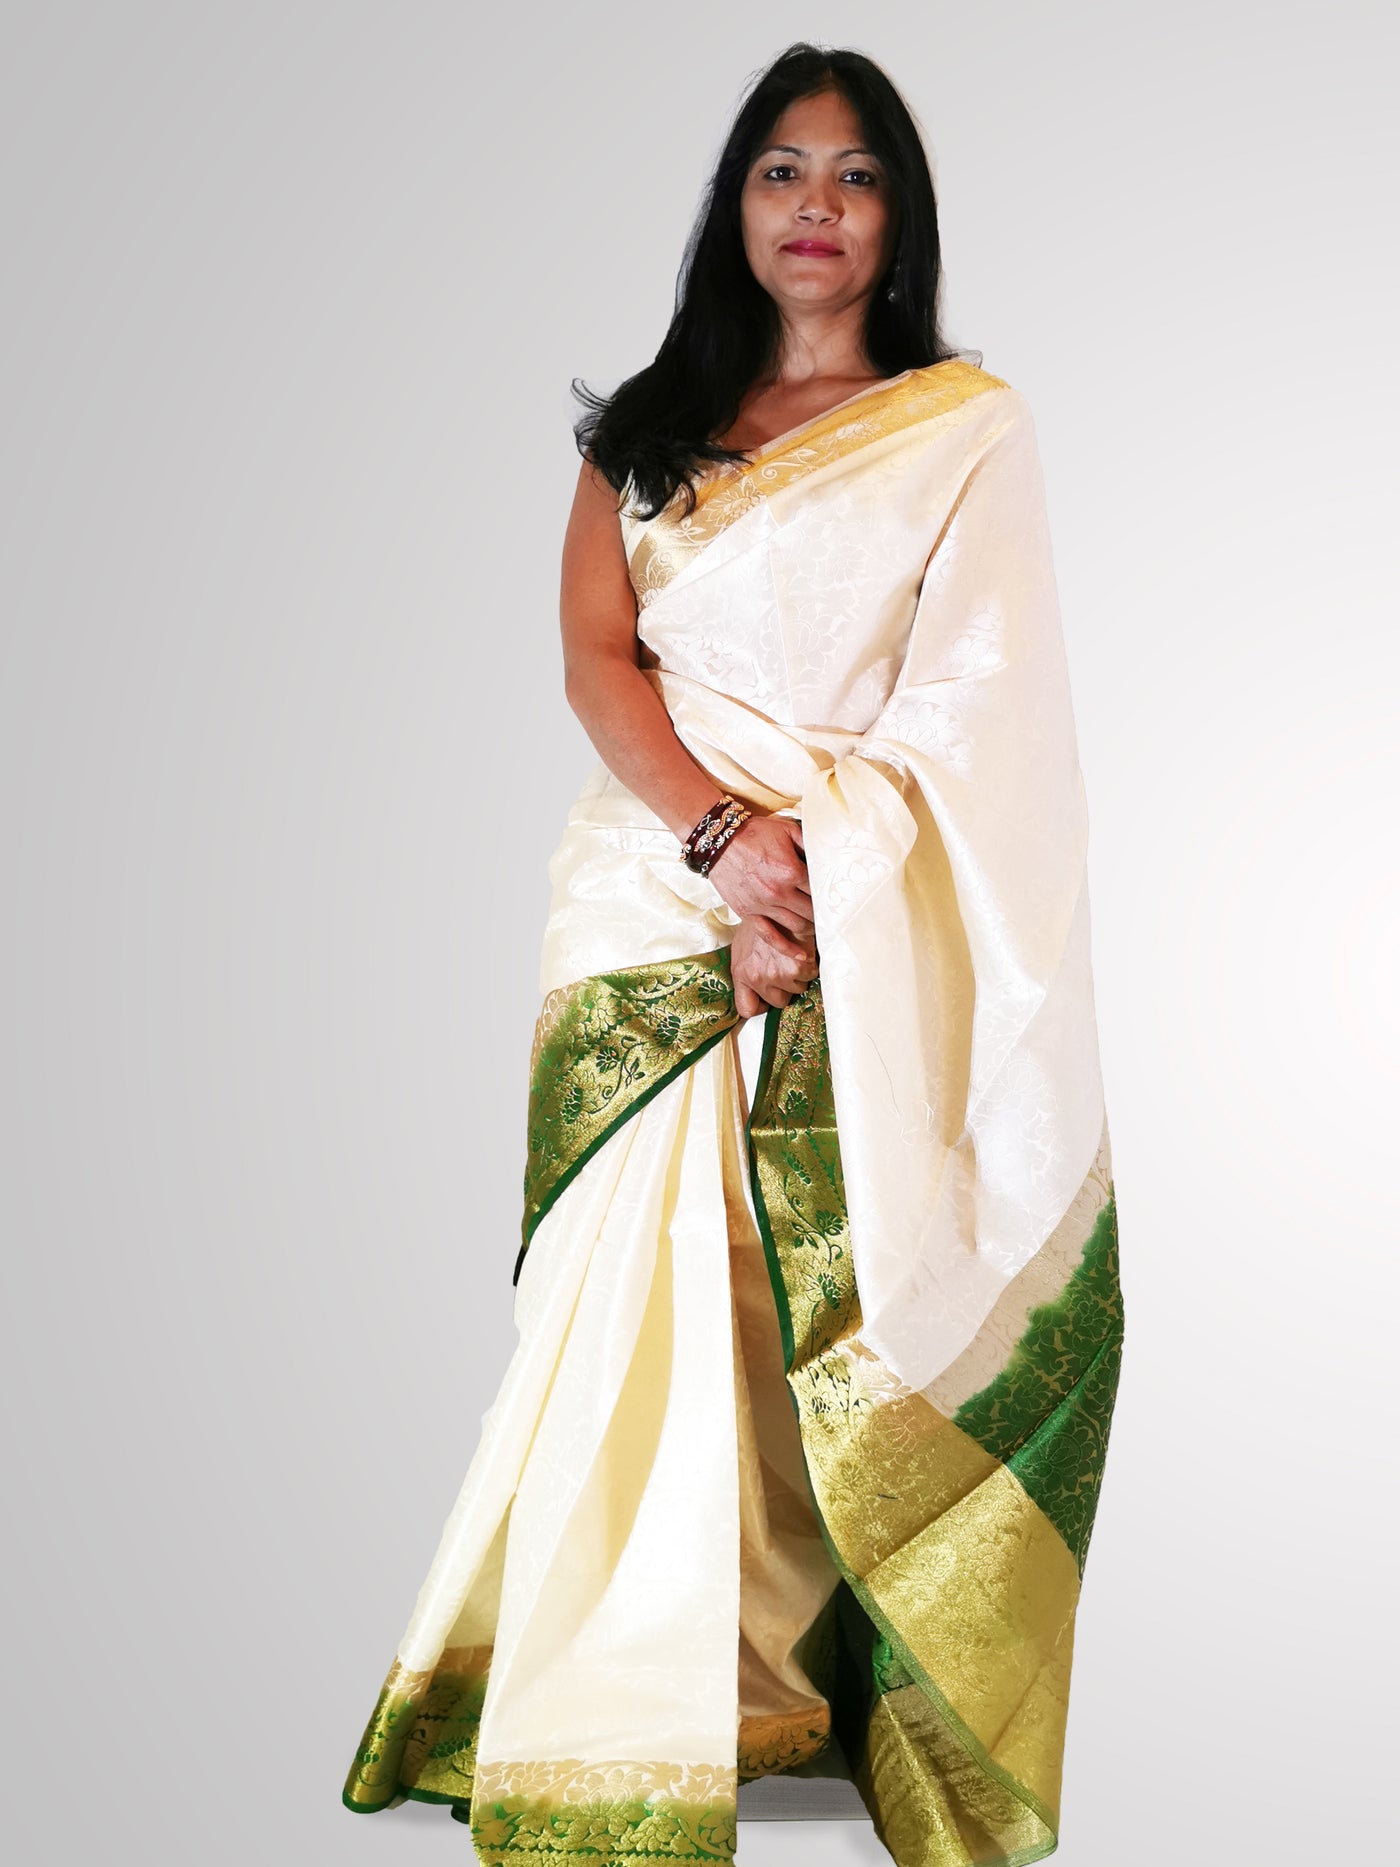 White Satin Silk Saree - Indian Clothing in Denver, CO, Aurora, CO, Boulder, CO, Fort Collins, CO, Colorado Springs, CO, Parker, CO, Highlands Ranch, CO, Cherry Creek, CO, Centennial, CO, and Longmont, CO. Nationwide shipping USA - India Fashion X